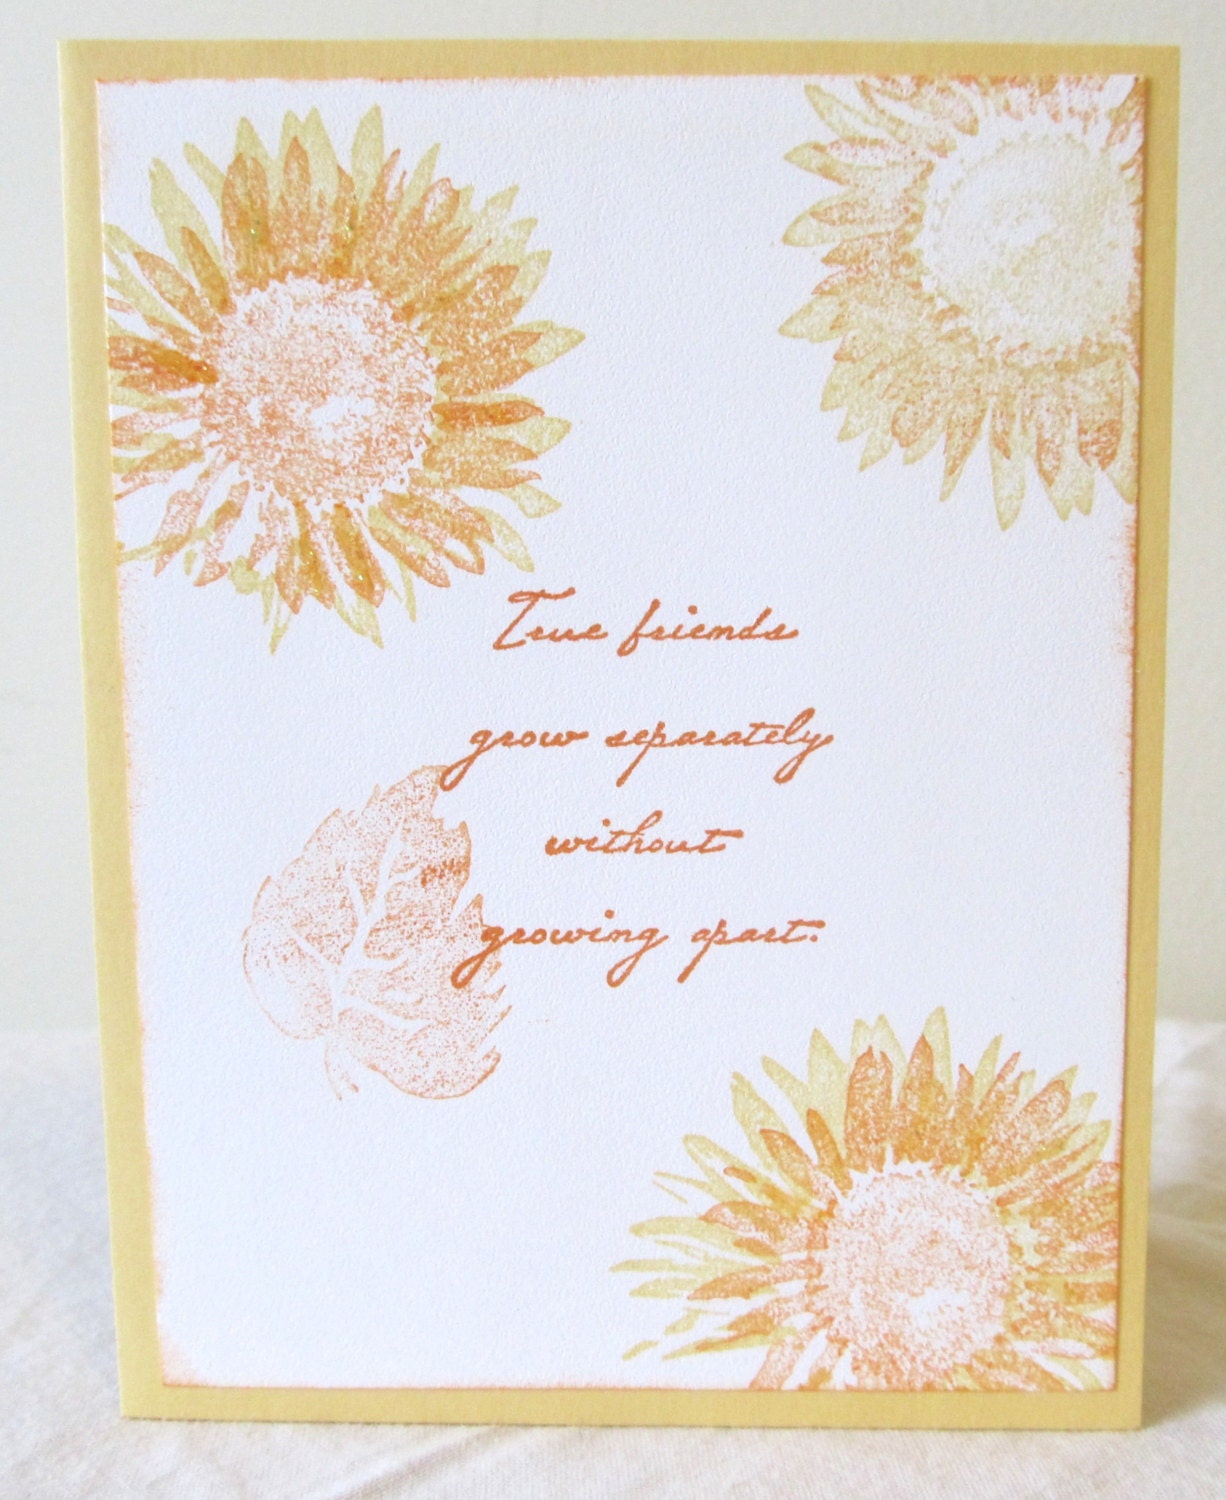 Handmade White and Yellow Card - Hand Stamped Card - Sunflower Card - All Occasion Card - Blank Card - Friendship Card - Yellow Card - PrettyByrdDesigns